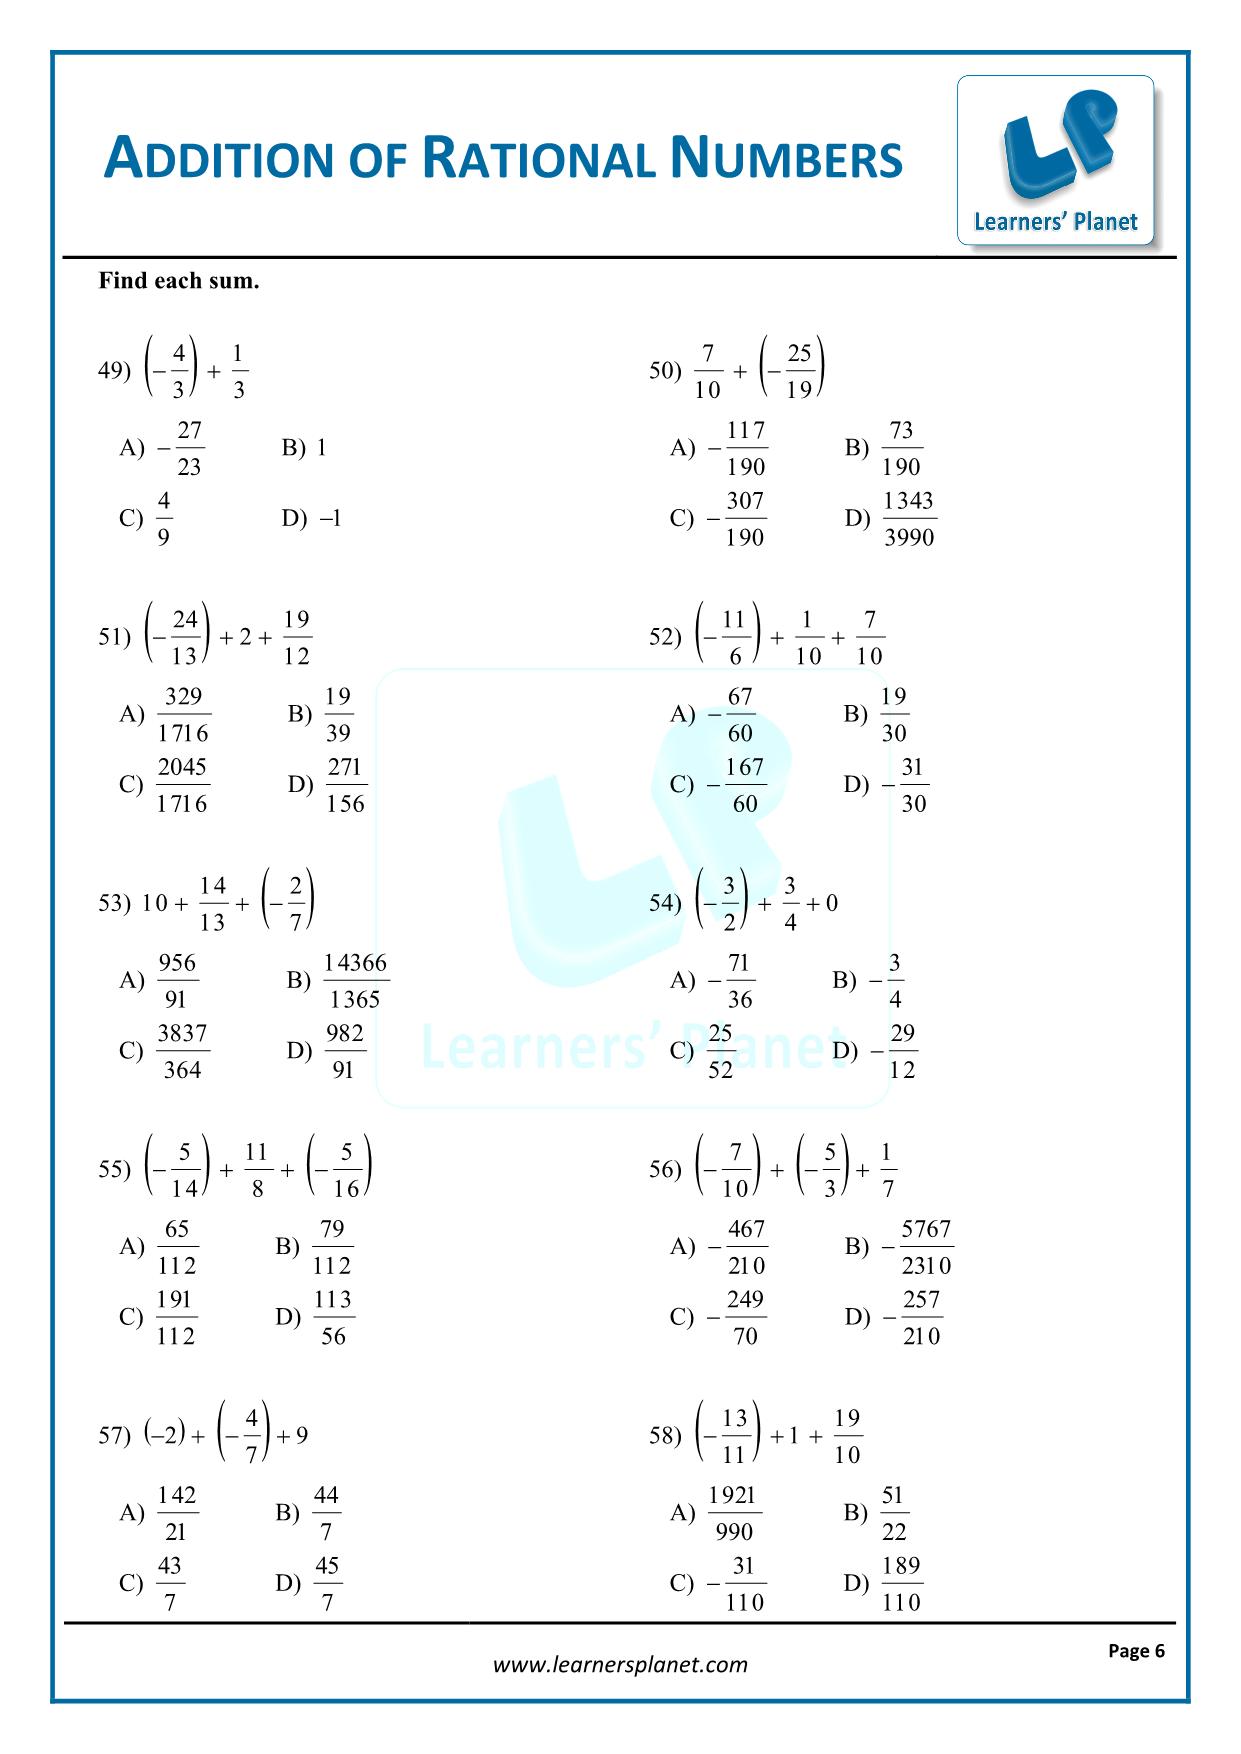 Adding rational numbers worksheets grade 20 maths Regarding Adding Rational Numbers Worksheet